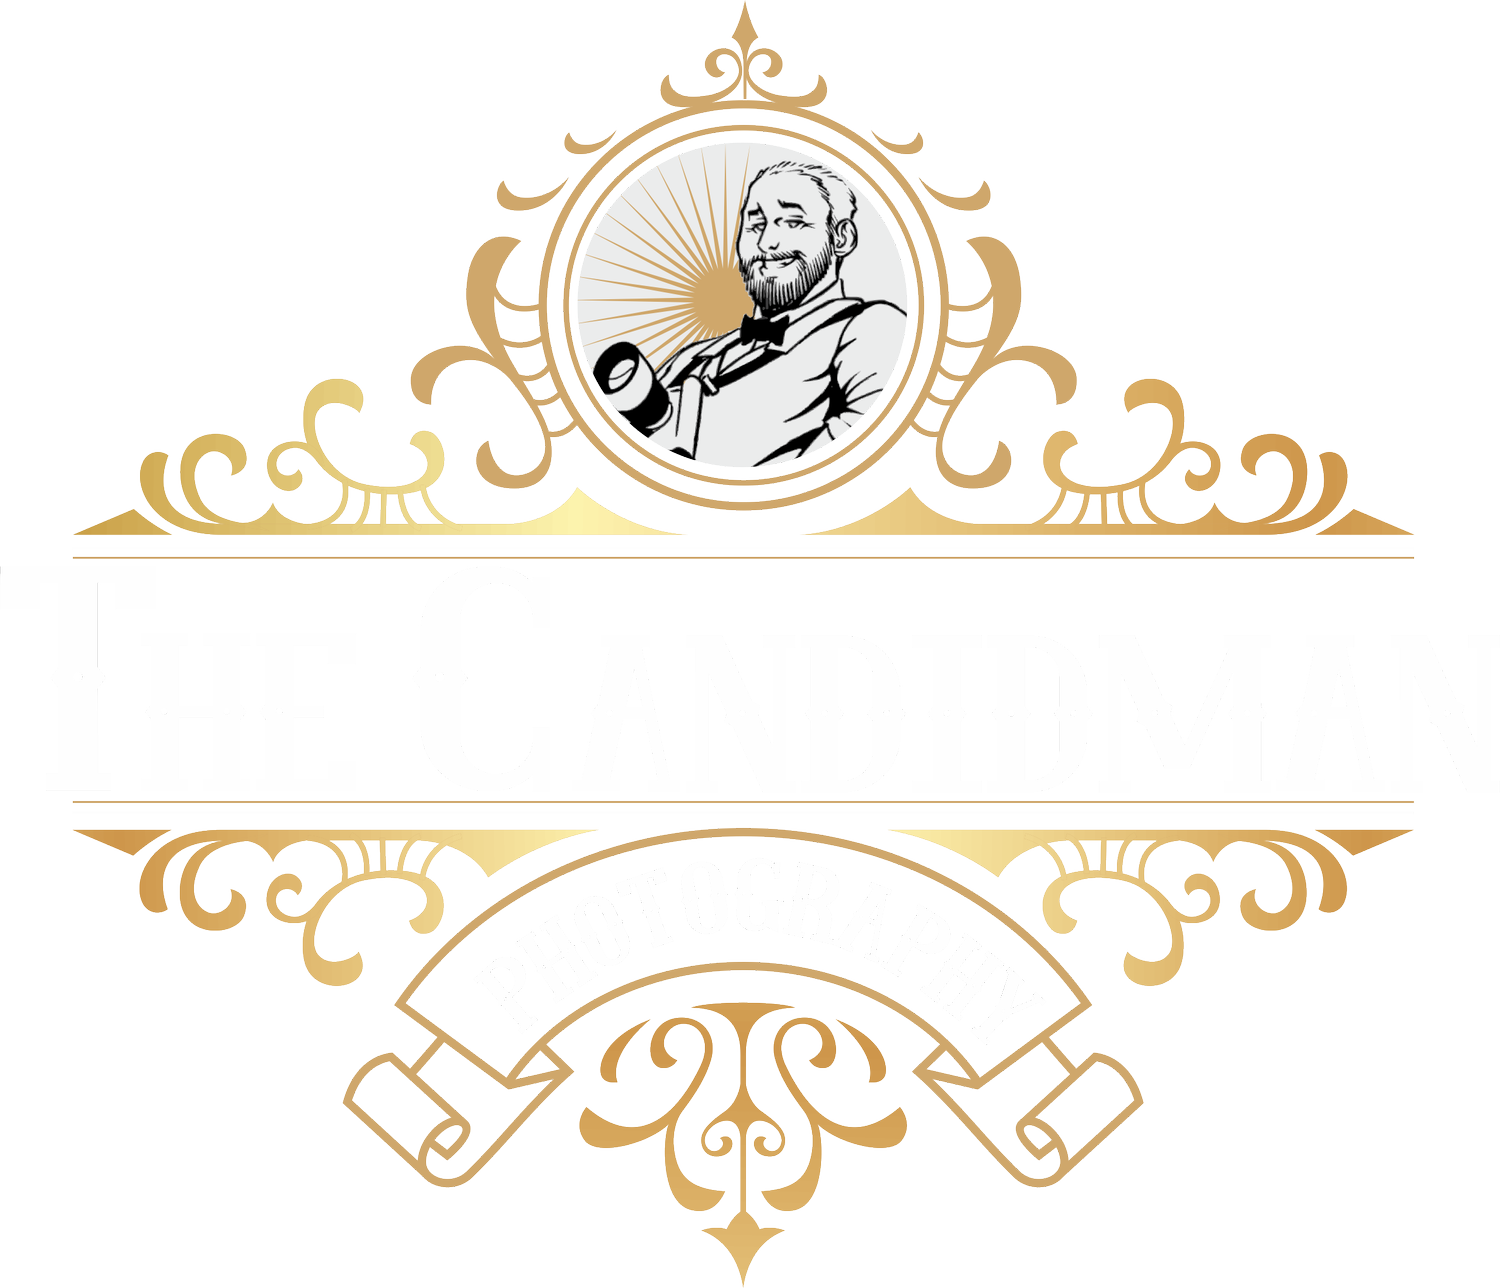 The Candidman Photography